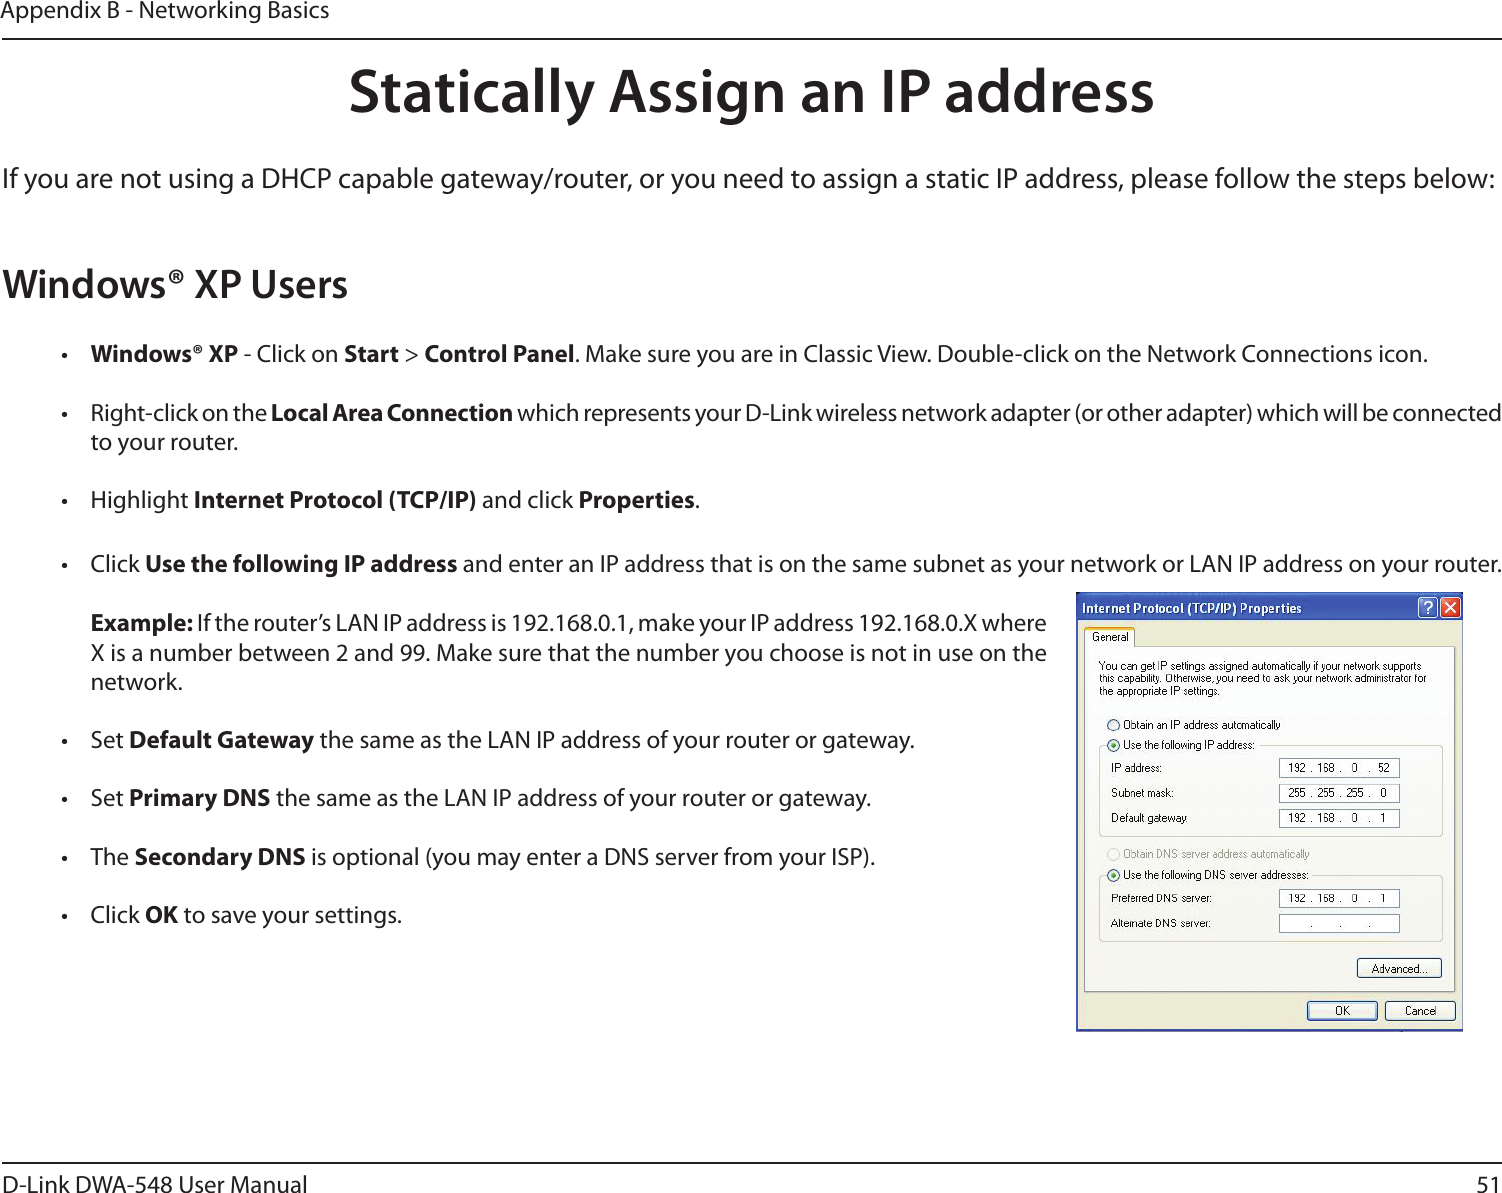 51D-Link DWA-548 User ManualAppendix B - Networking BasicsStatically Assign an IP addressIf you are not using a DHCP capable gateway/router, or you need to assign a static IP address, please follow the steps below:Windows® XP Users•  Windows® XP - Click on Start &gt; Control Panel. Make sure you are in Classic View. Double-click on the Network Connections icon. •  Right-click on the Local Area Connection which represents your D-Link wireless network adapter (or other adapter) which will be connected to your router.•  Highlight Internet Protocol (TCP/IP) and click Properties.•  Click Use the following IP address and enter an IP address that is on the same subnet as your network or LAN IP address on your router. Example: If the router’s LAN IP address is 192.168.0.1, make your IP address 192.168.0.X where X is a number between 2 and 99. Make sure that the number you choose is not in use on the network. •  Set Default Gateway the same as the LAN IP address of your router or gateway.•  Set Primary DNS the same as the LAN IP address of your router or gateway. •  The Secondary DNS is optional (you may enter a DNS server from your ISP).•  Click OK to save your settings.